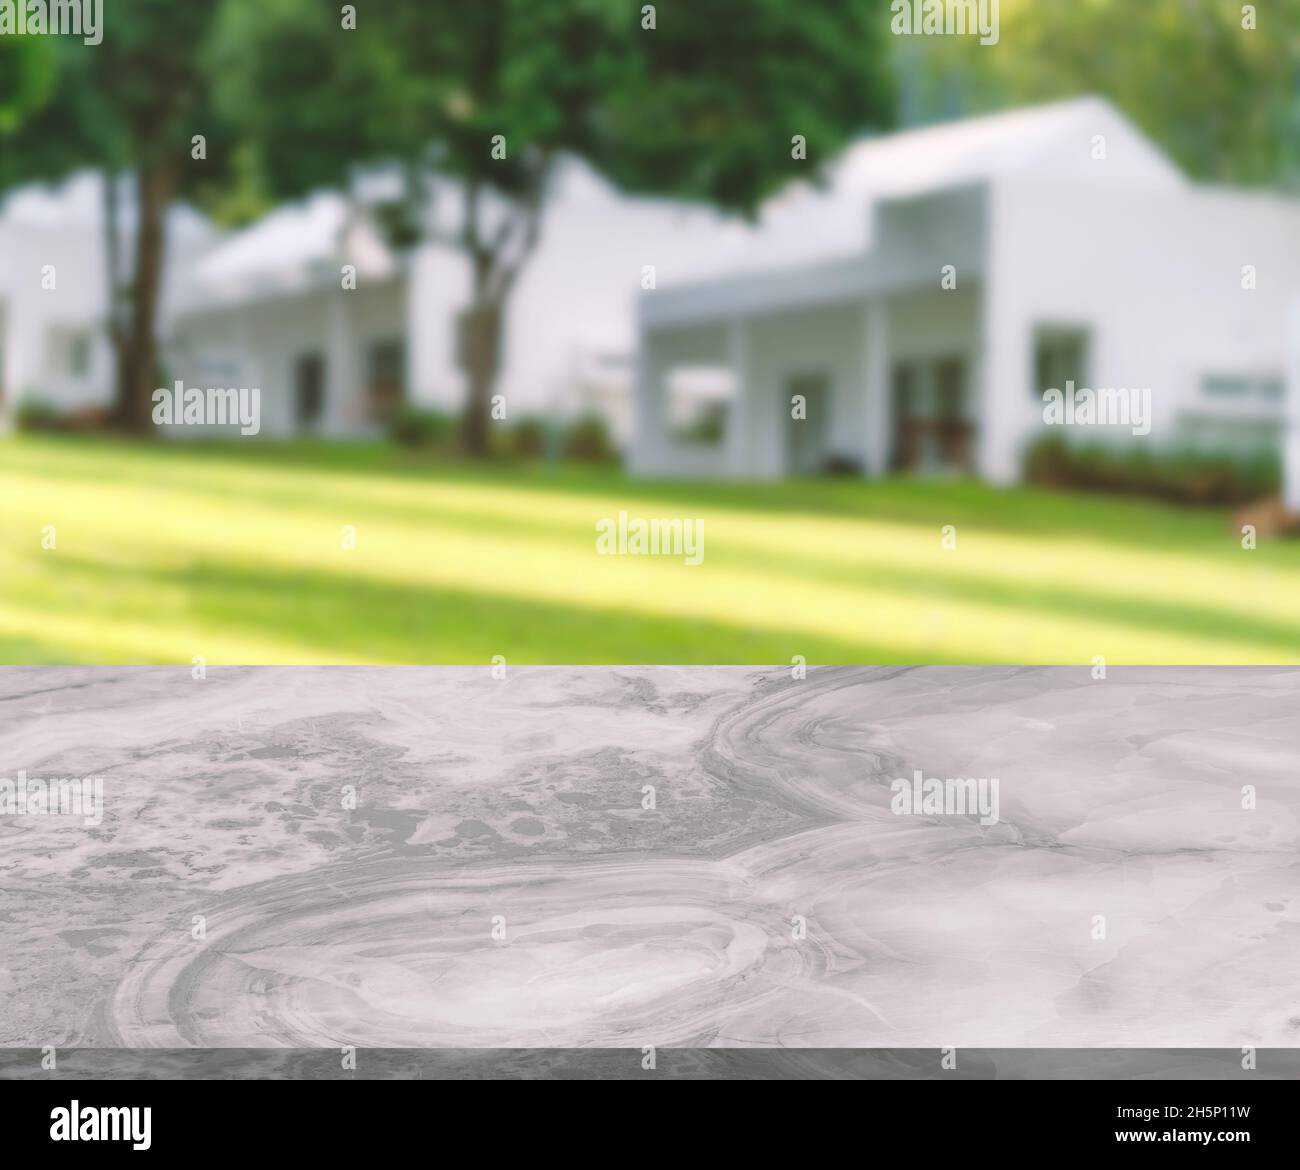 Blank space of marble table for product presentation, little shiny surface, perspective view with the background of blurred white houses on a hillside Stock Photo